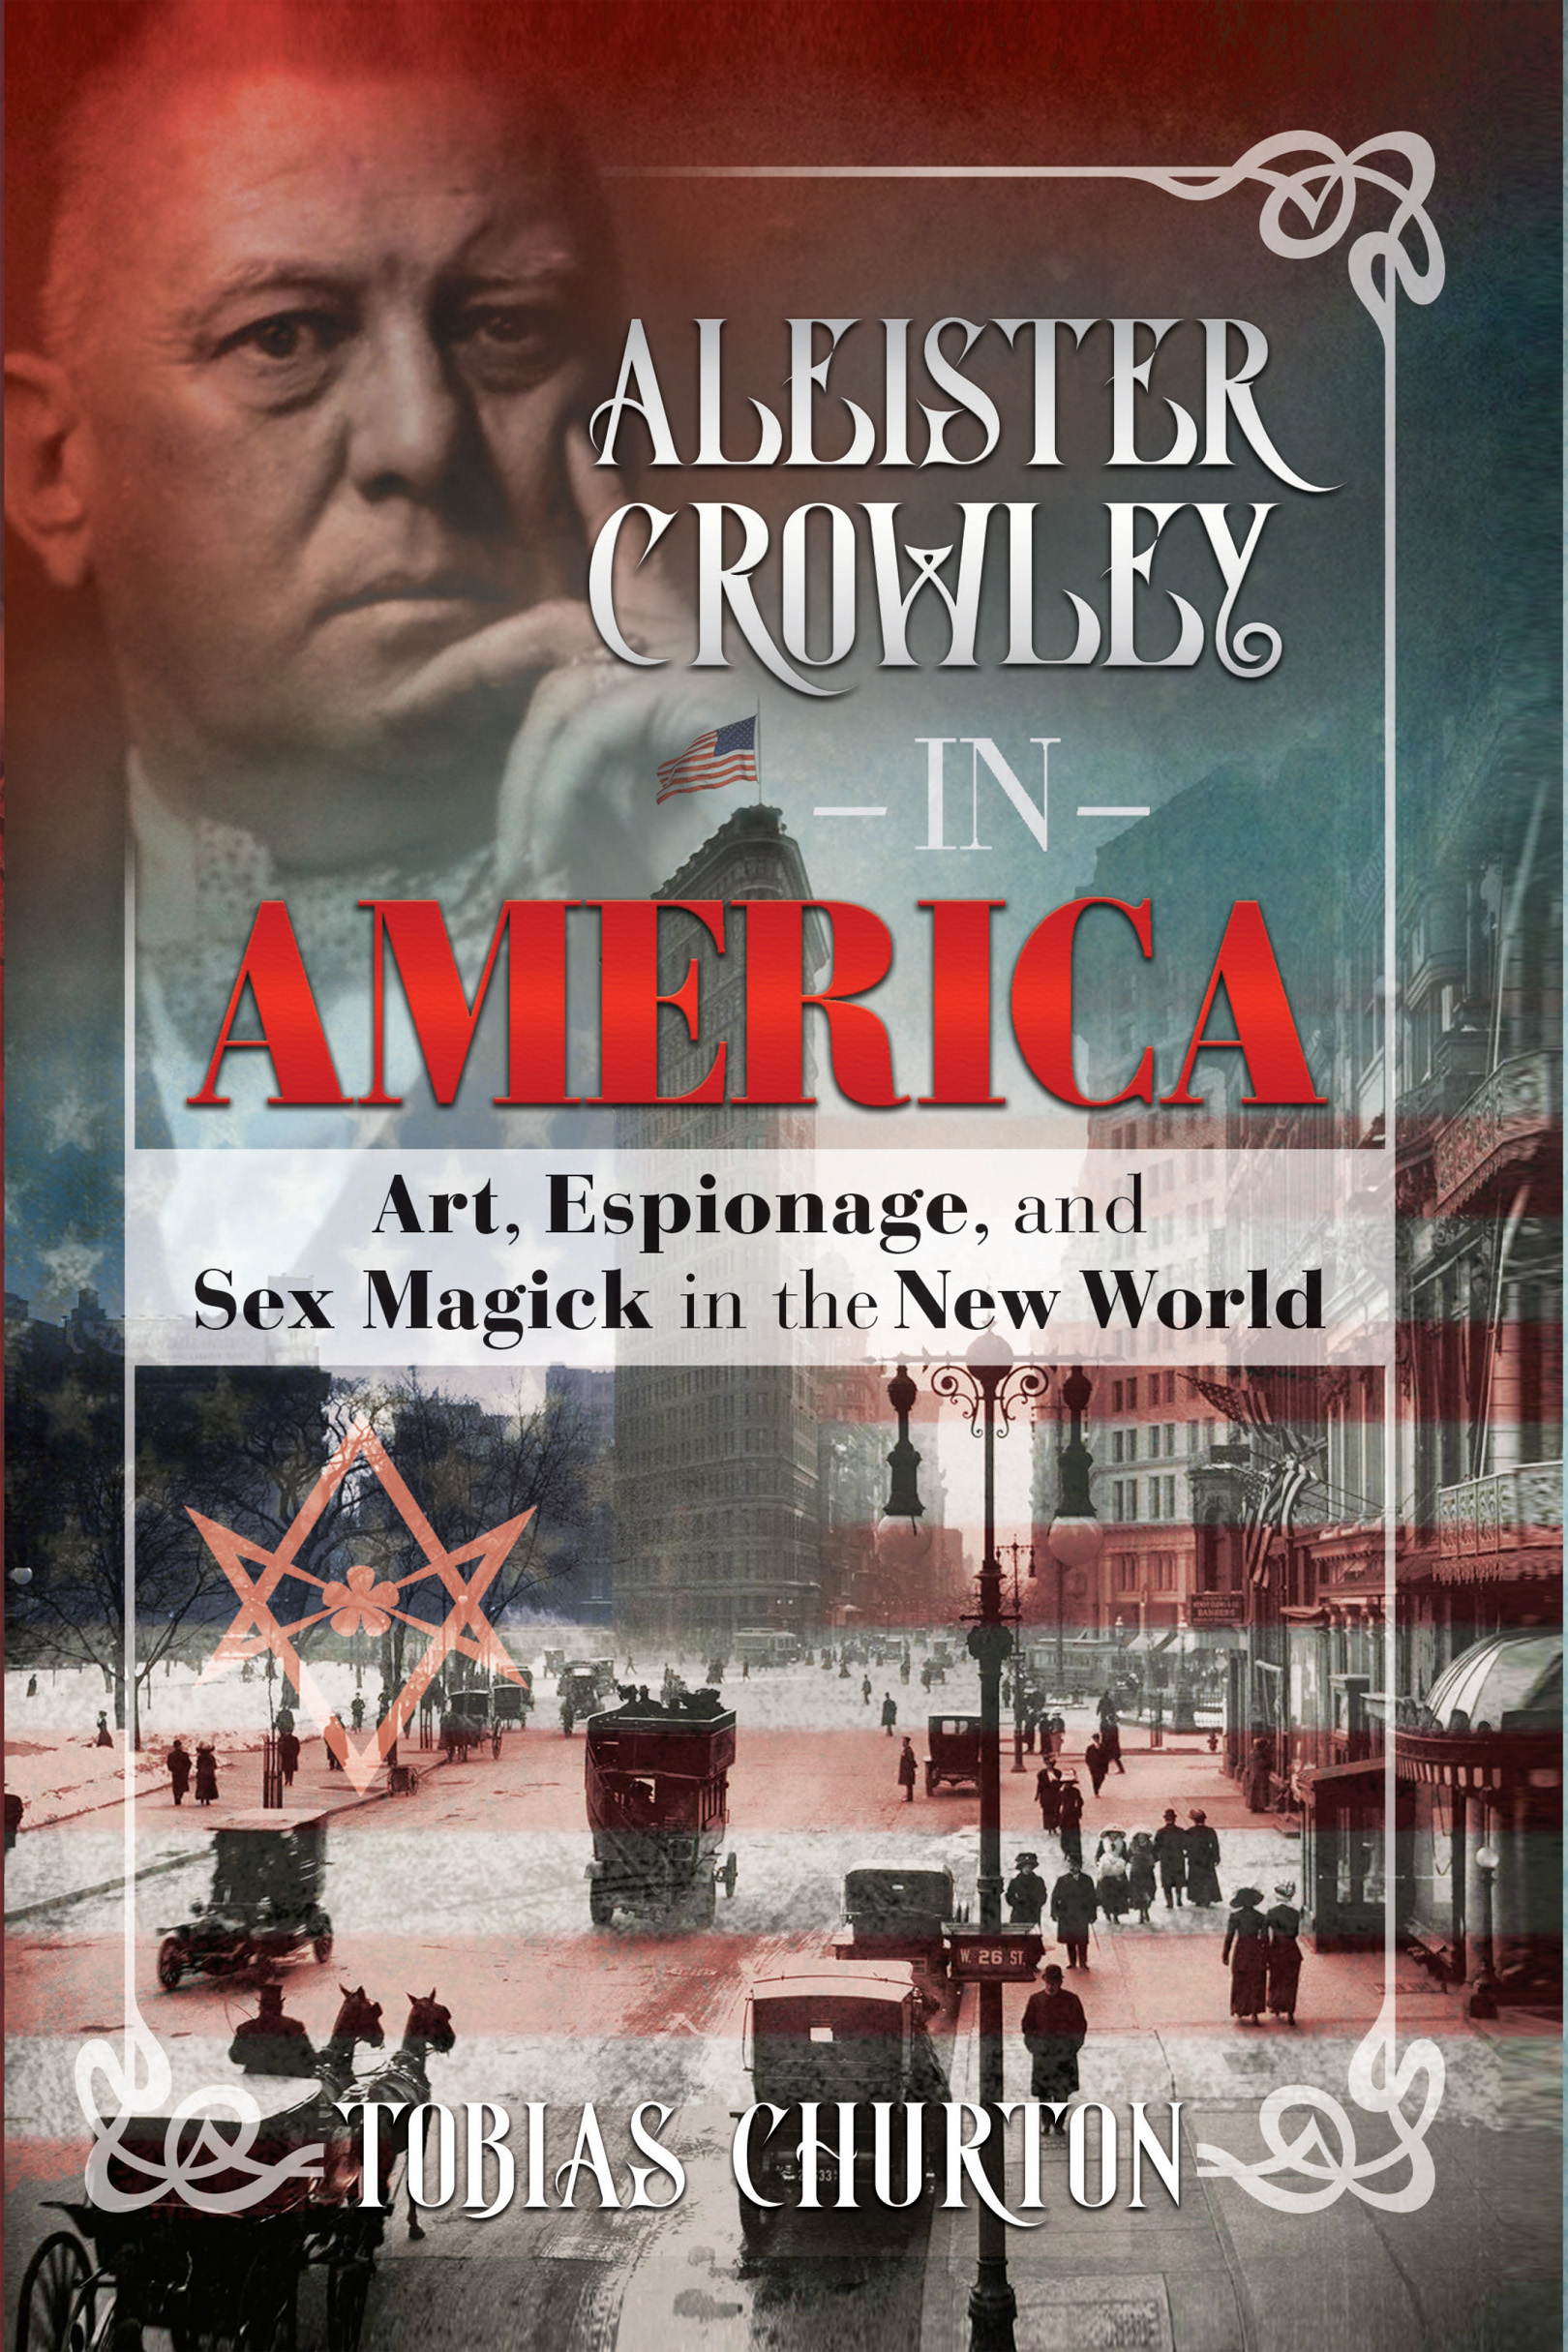 Aleister Crowley in America Art Espionage and Sex Magick in the New World - image 1